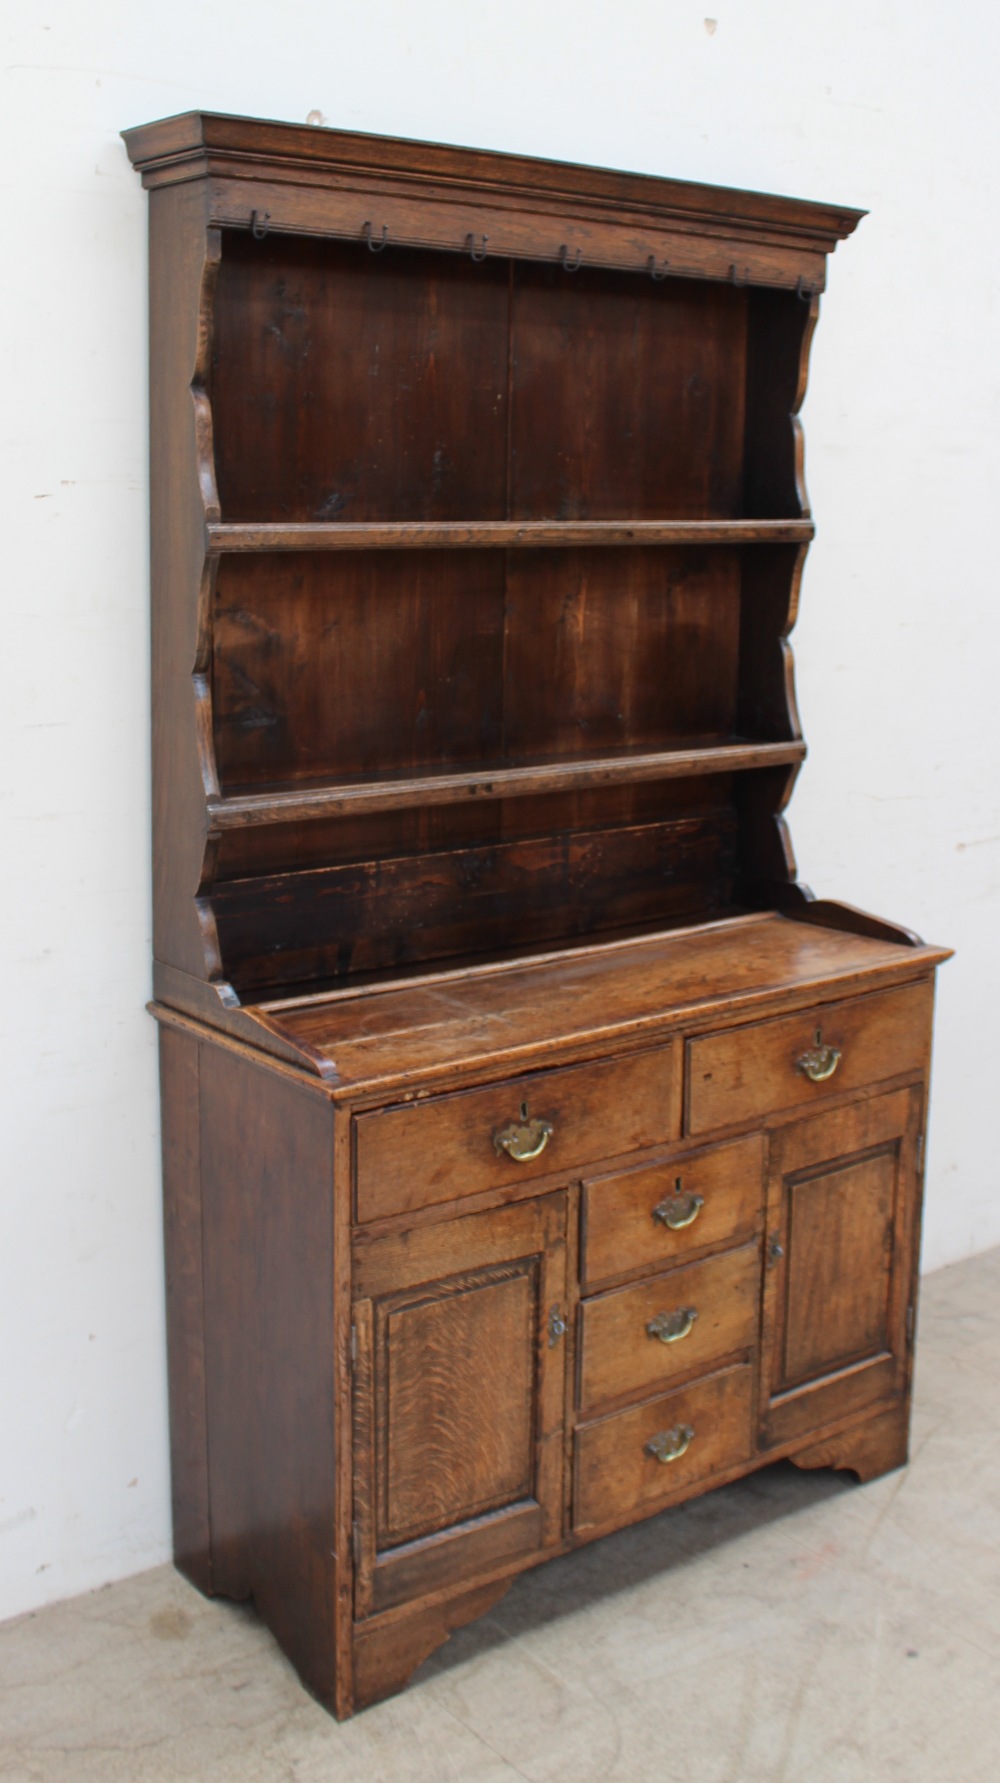 A late 19th / early 20th century oak North Wales type dresser the rack with a moulded cornice above - Image 2 of 4